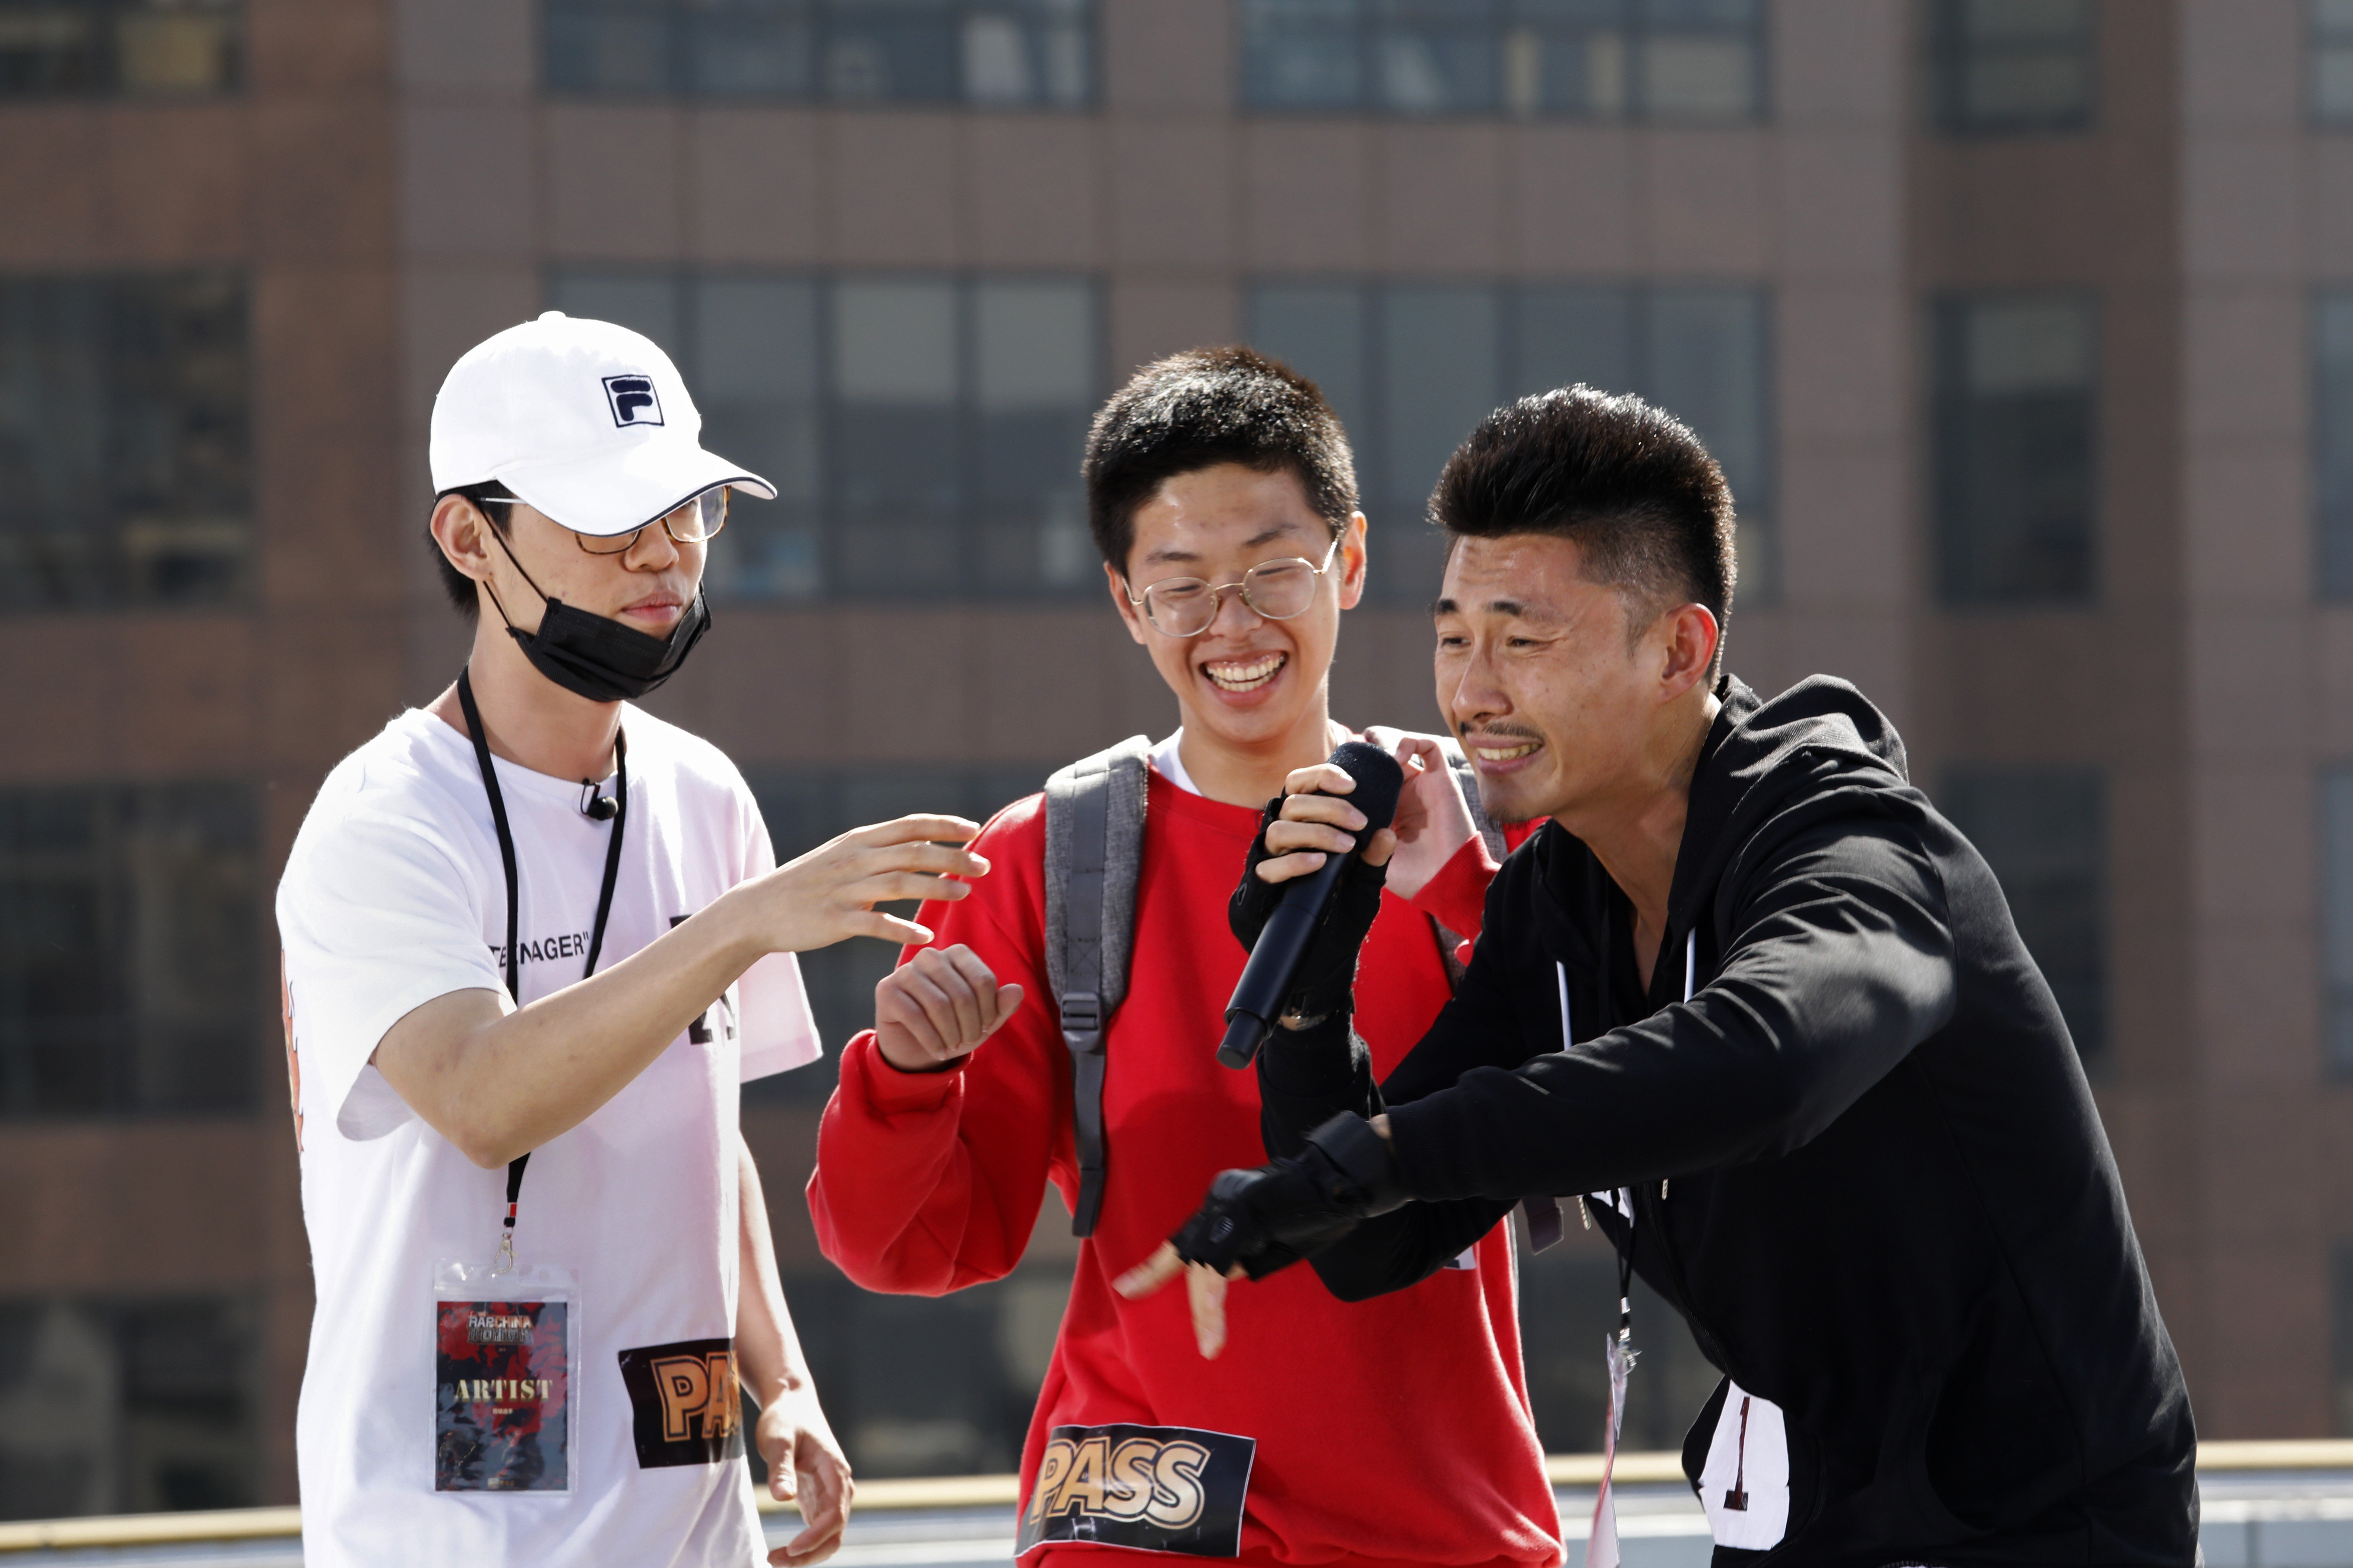 An audition for The Rap of China in Los Angeles. The show helped elevate rap music in China, reaching more than three billion views in its first season. Photo: Carolyn Cole/Los Angeles Times/TNS